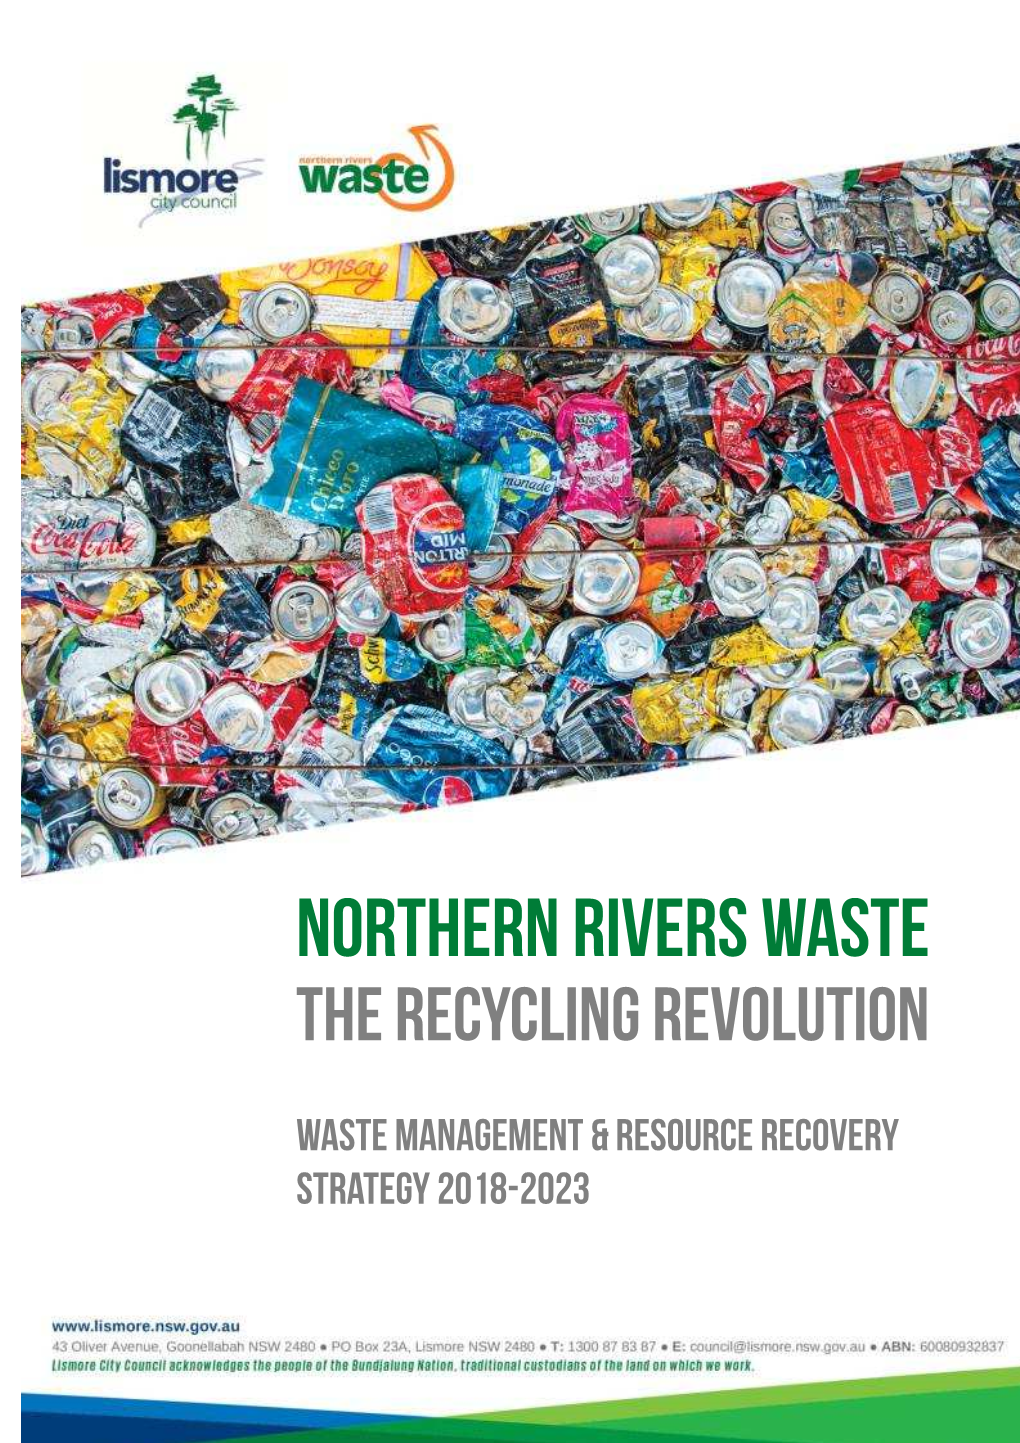 Waste Management and Resource Recovery Strategy 2018-2023